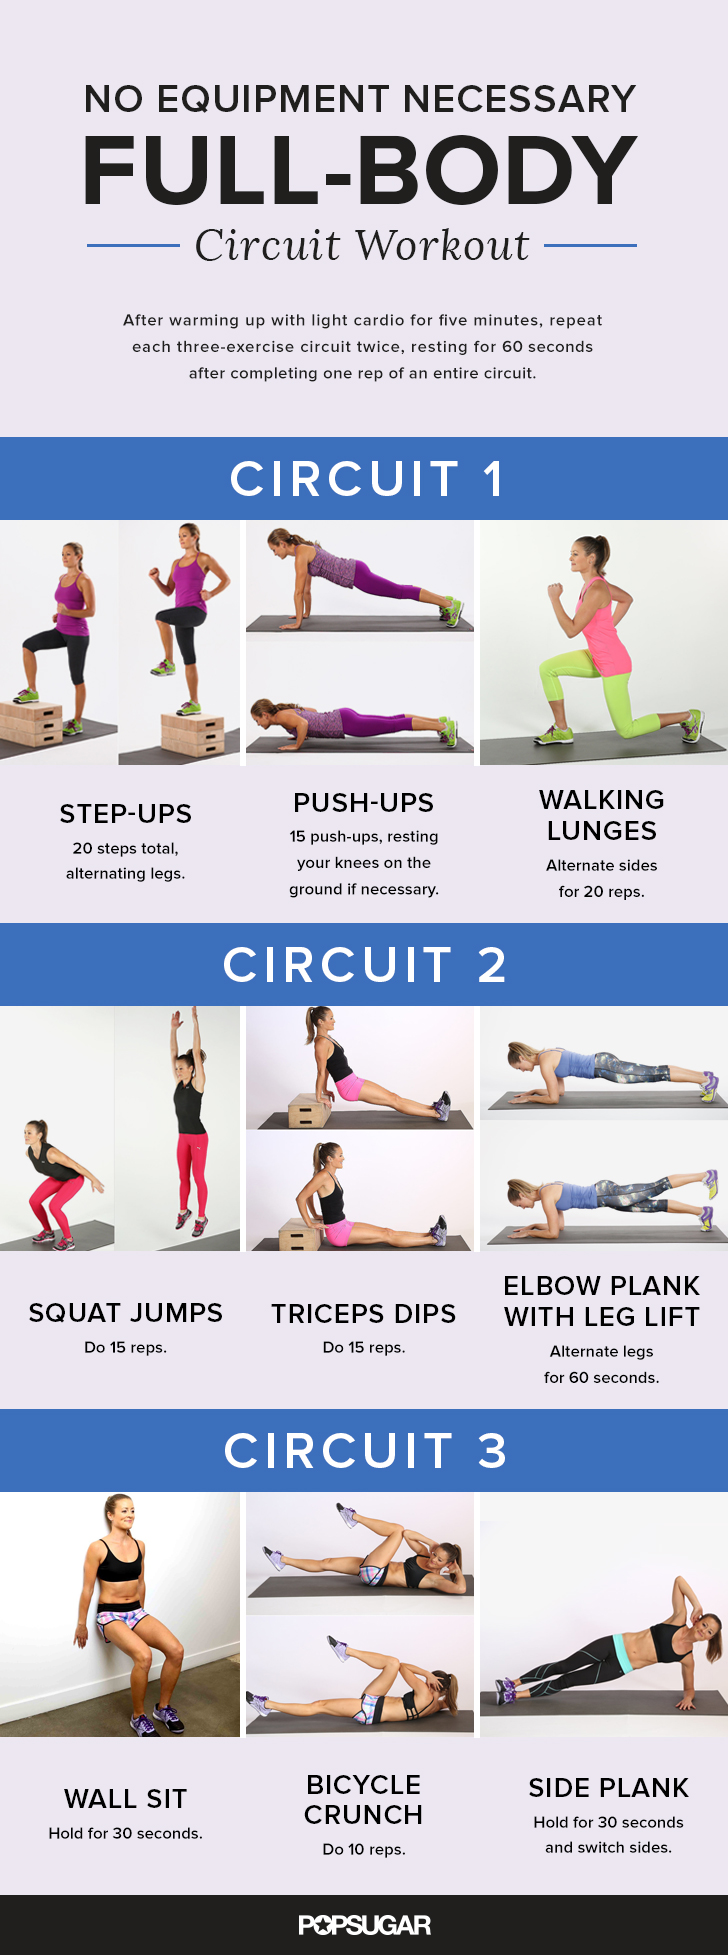 Popsugar Weekly Workout With Printable